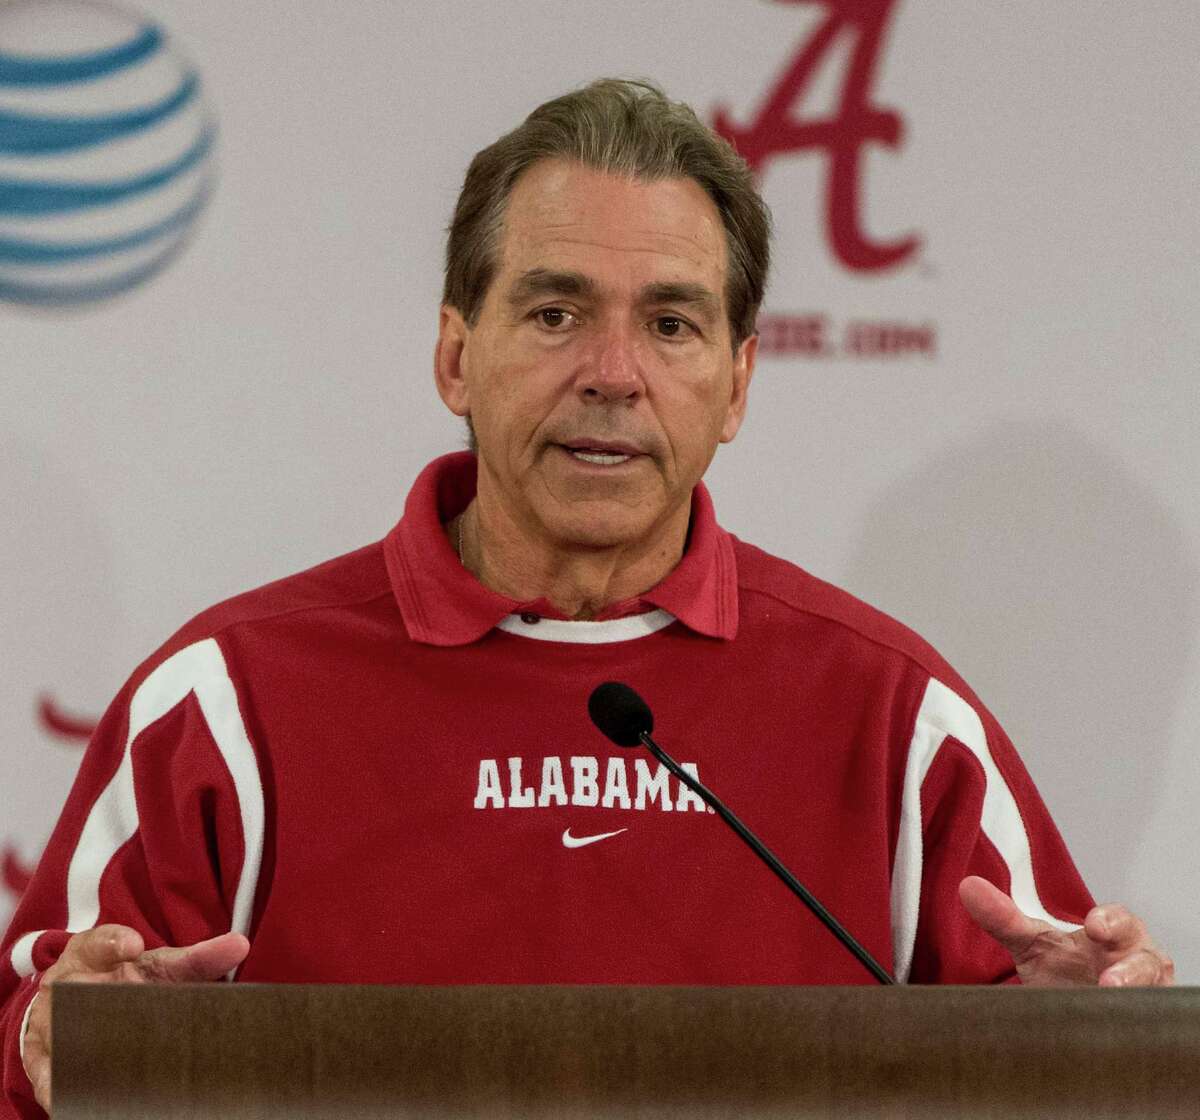 Alabama coach Nick Saban speaks about spring practice during an NCAA college football, Friday, March 11, 2016, at the Mal Moore Athletic Facility in Tuscaloosa, Ala. (Vasha Hunt/AL.com via AP) MAGS OUT; MANDATORY CREDIT